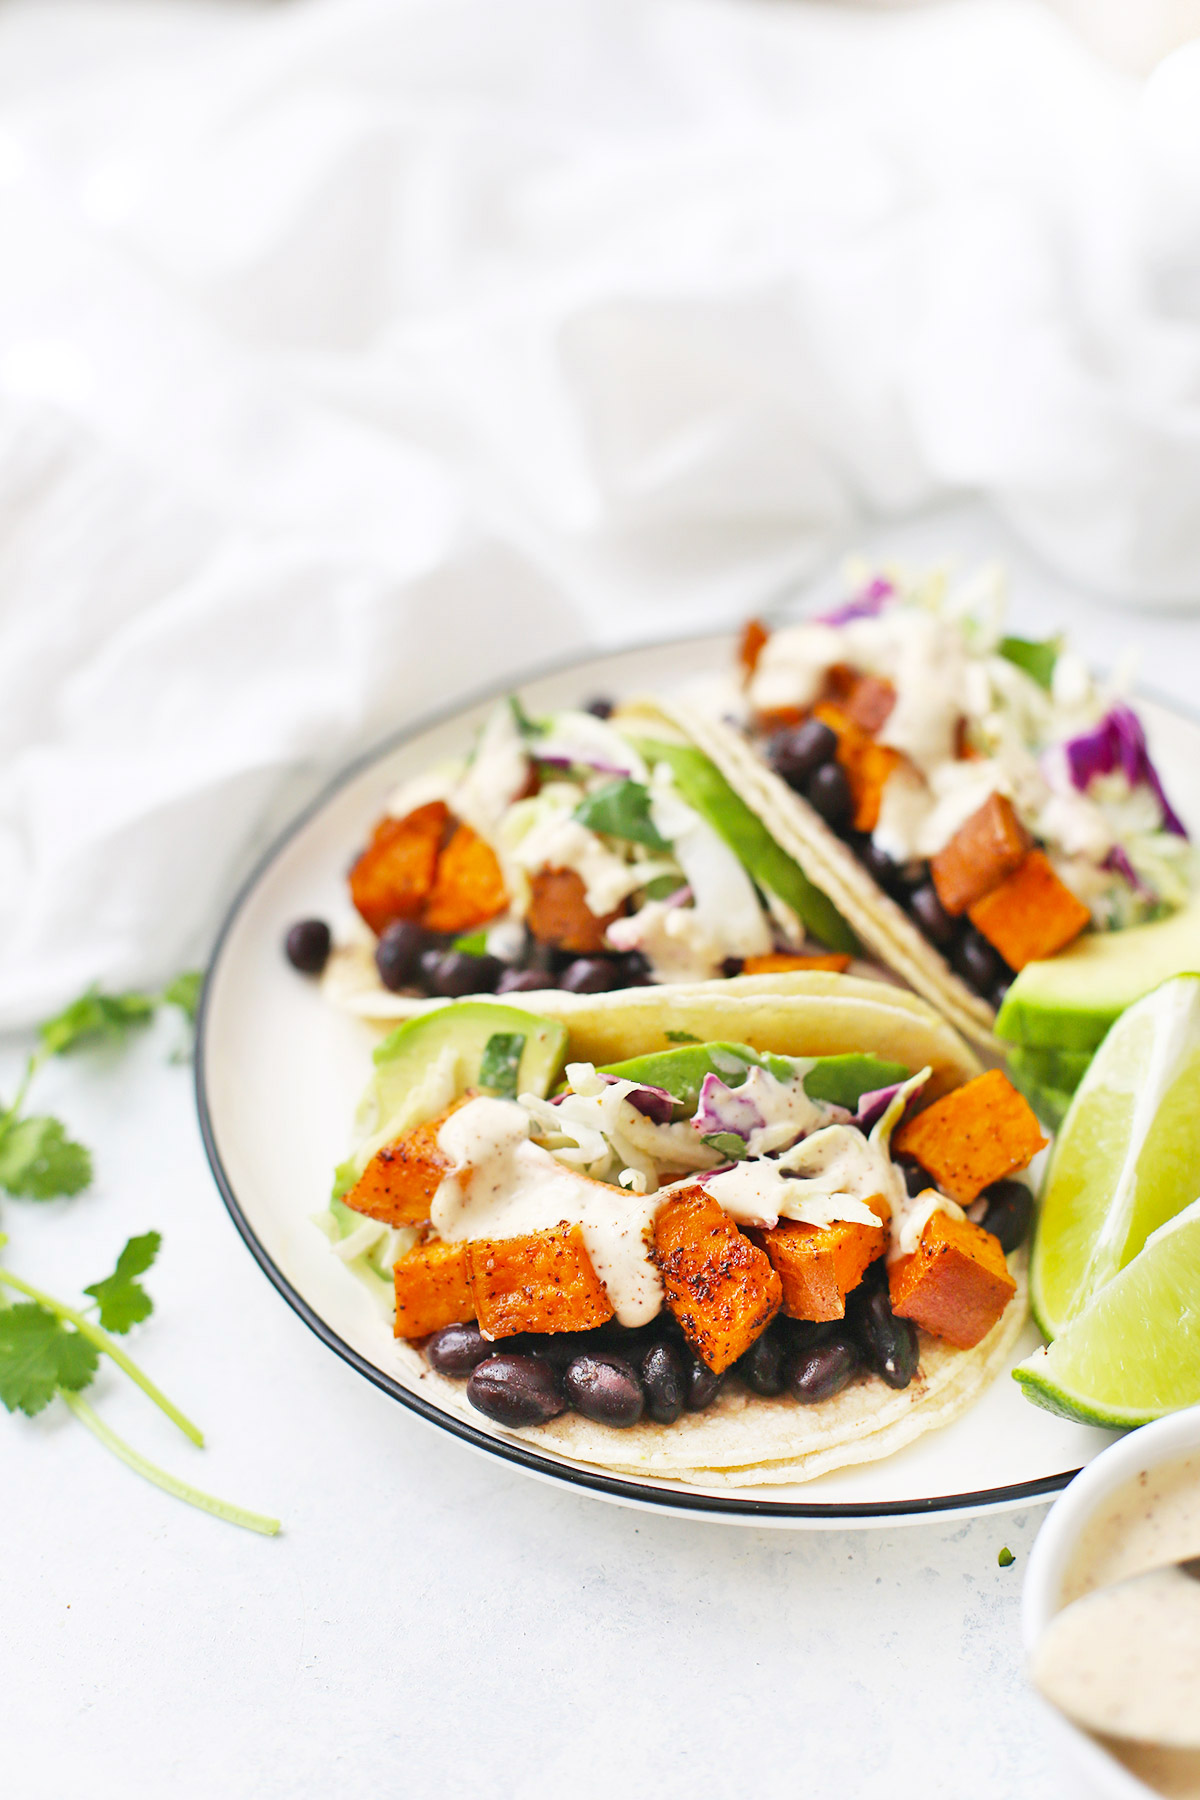 Sweet Potato Black Bean Tacos from One Lovely Life